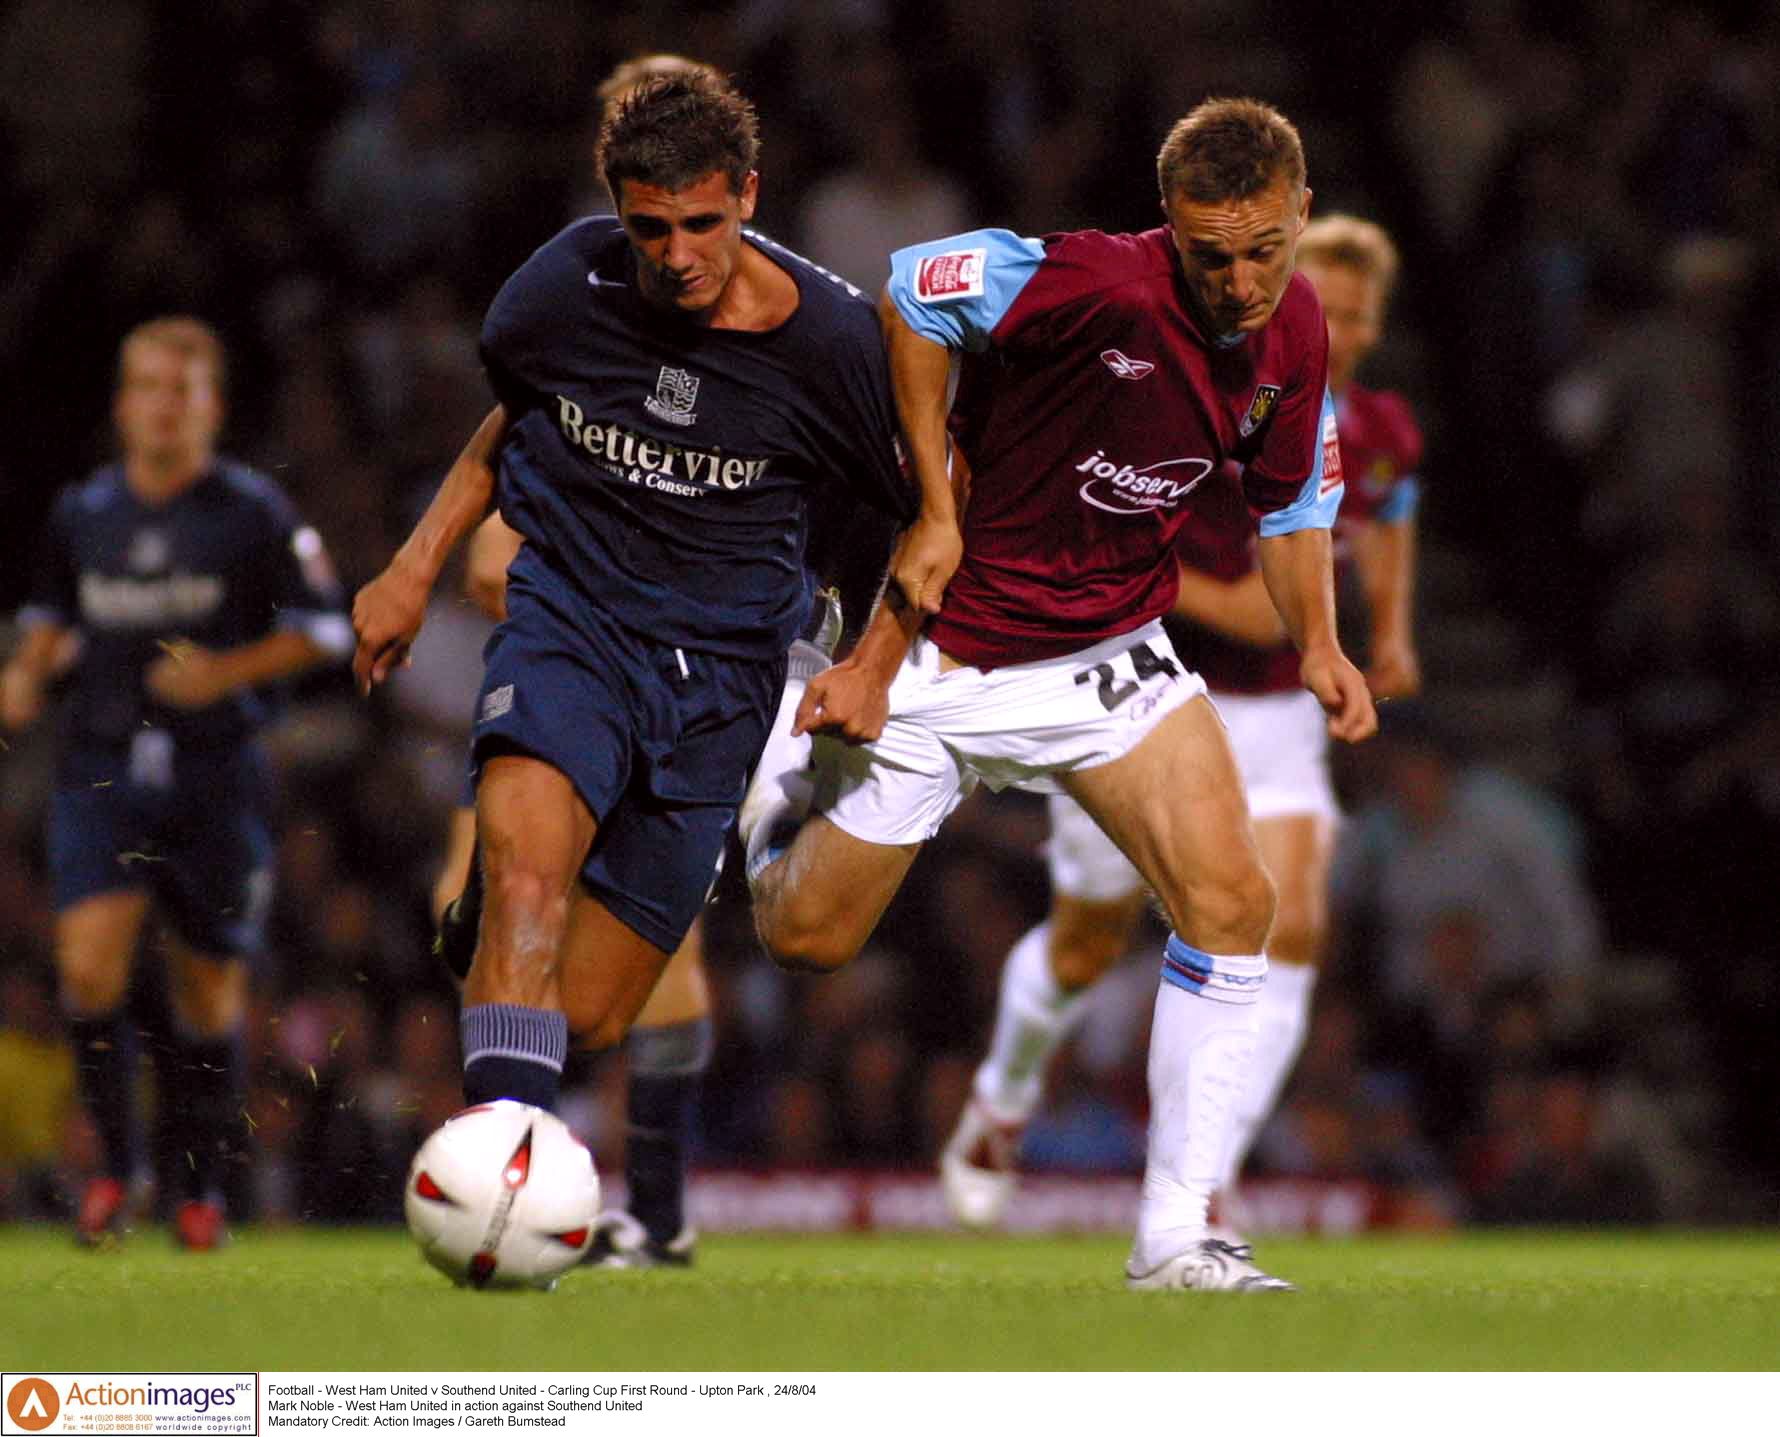 Football - West Ham United v Southend United - Carling Cup First Round - Upton Park , 24/8/04 
Mark Noble - West Ham United in action against Southend United 
Mandatory Credit: Action Images / Gareth Bumstead 
04/05